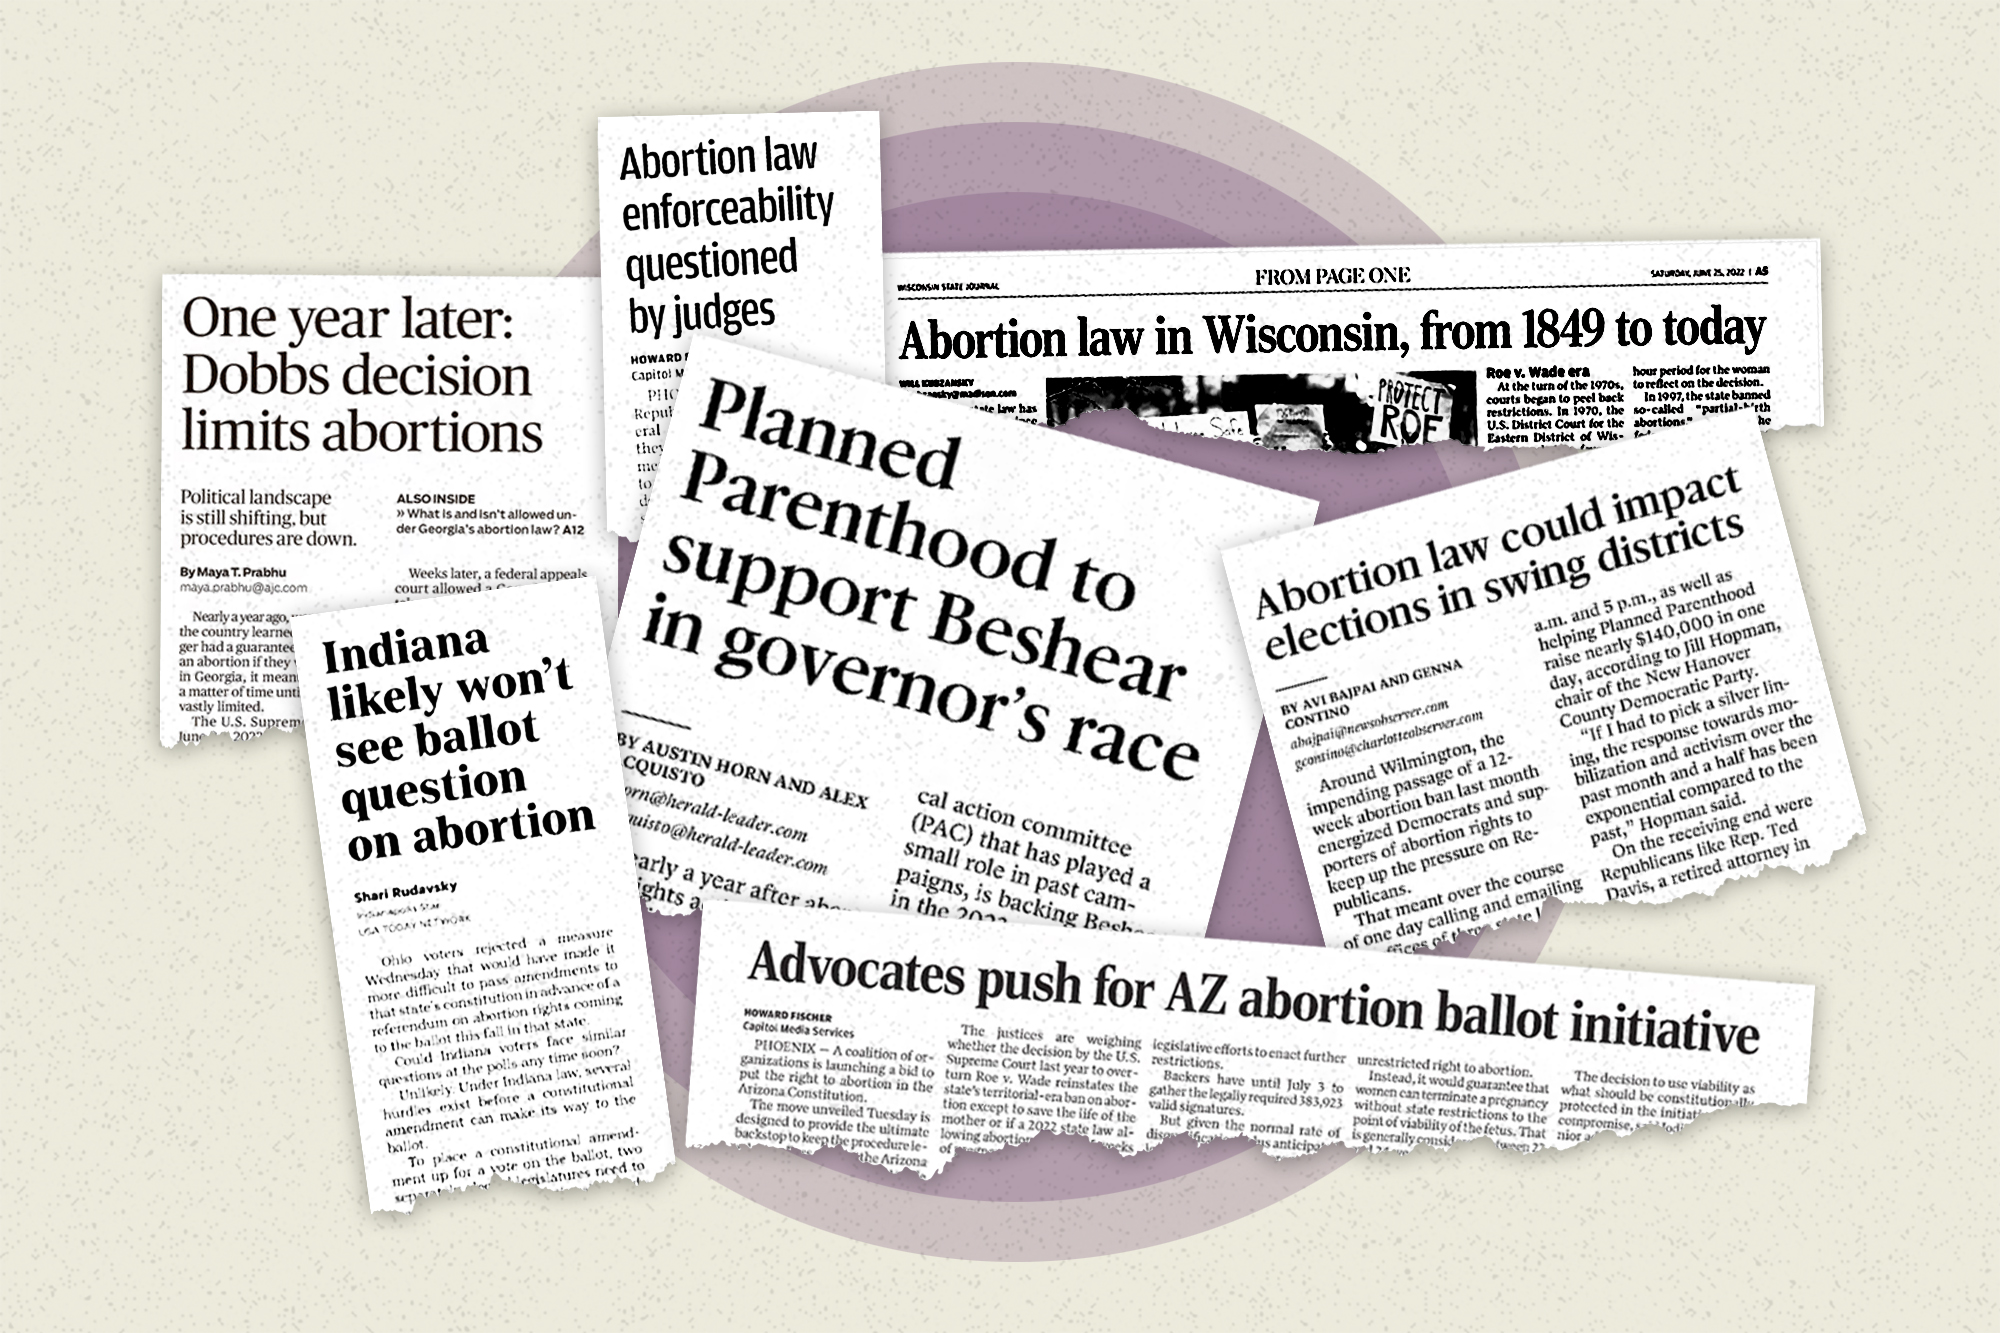 How abortion coverage changed in the media, according to the data